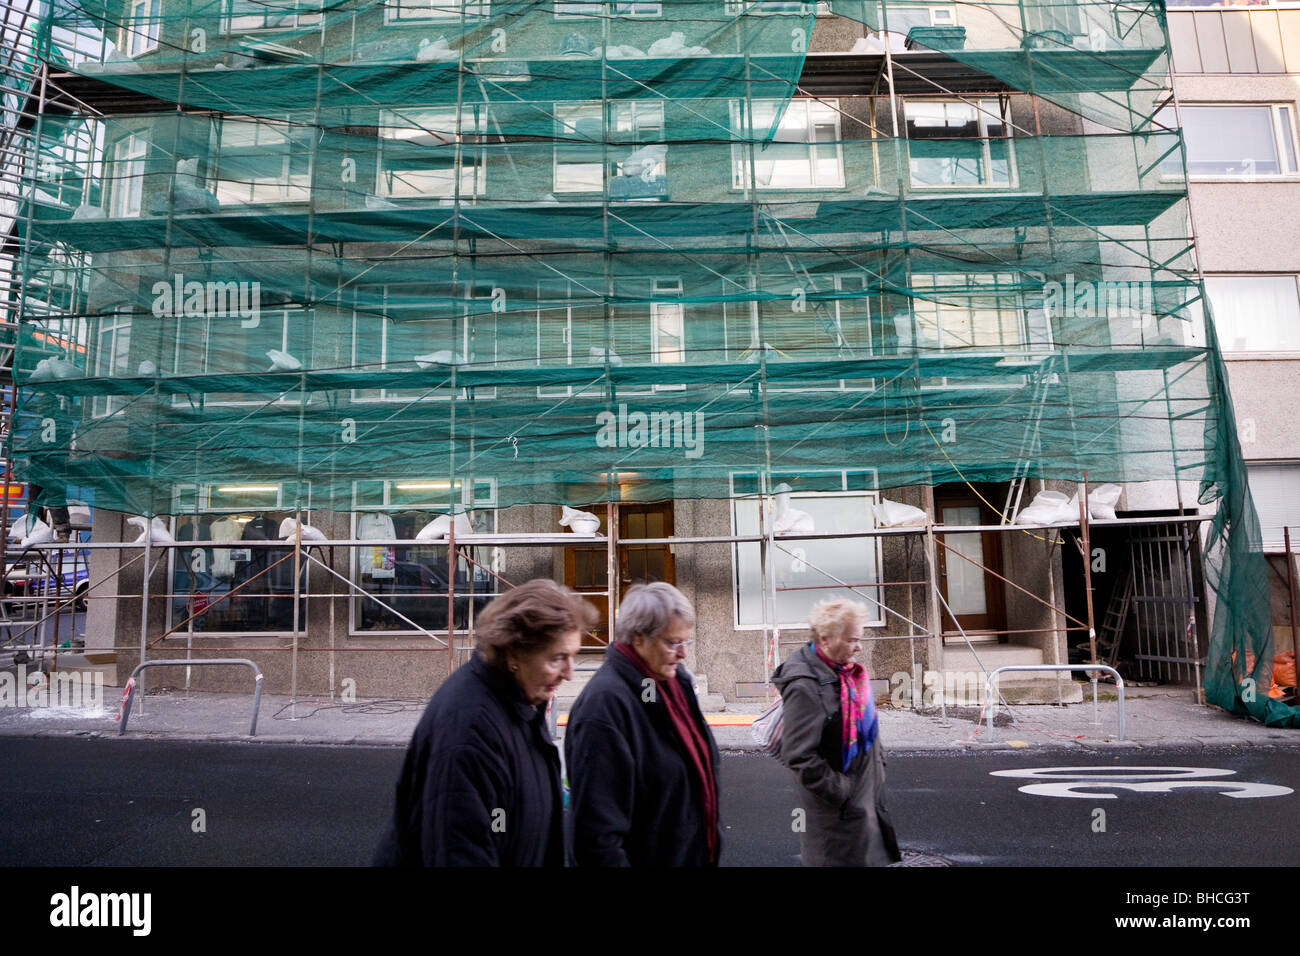 Scaffolding outside a house being repaired, people walking past. Reykjavik Iceland Stock Photo